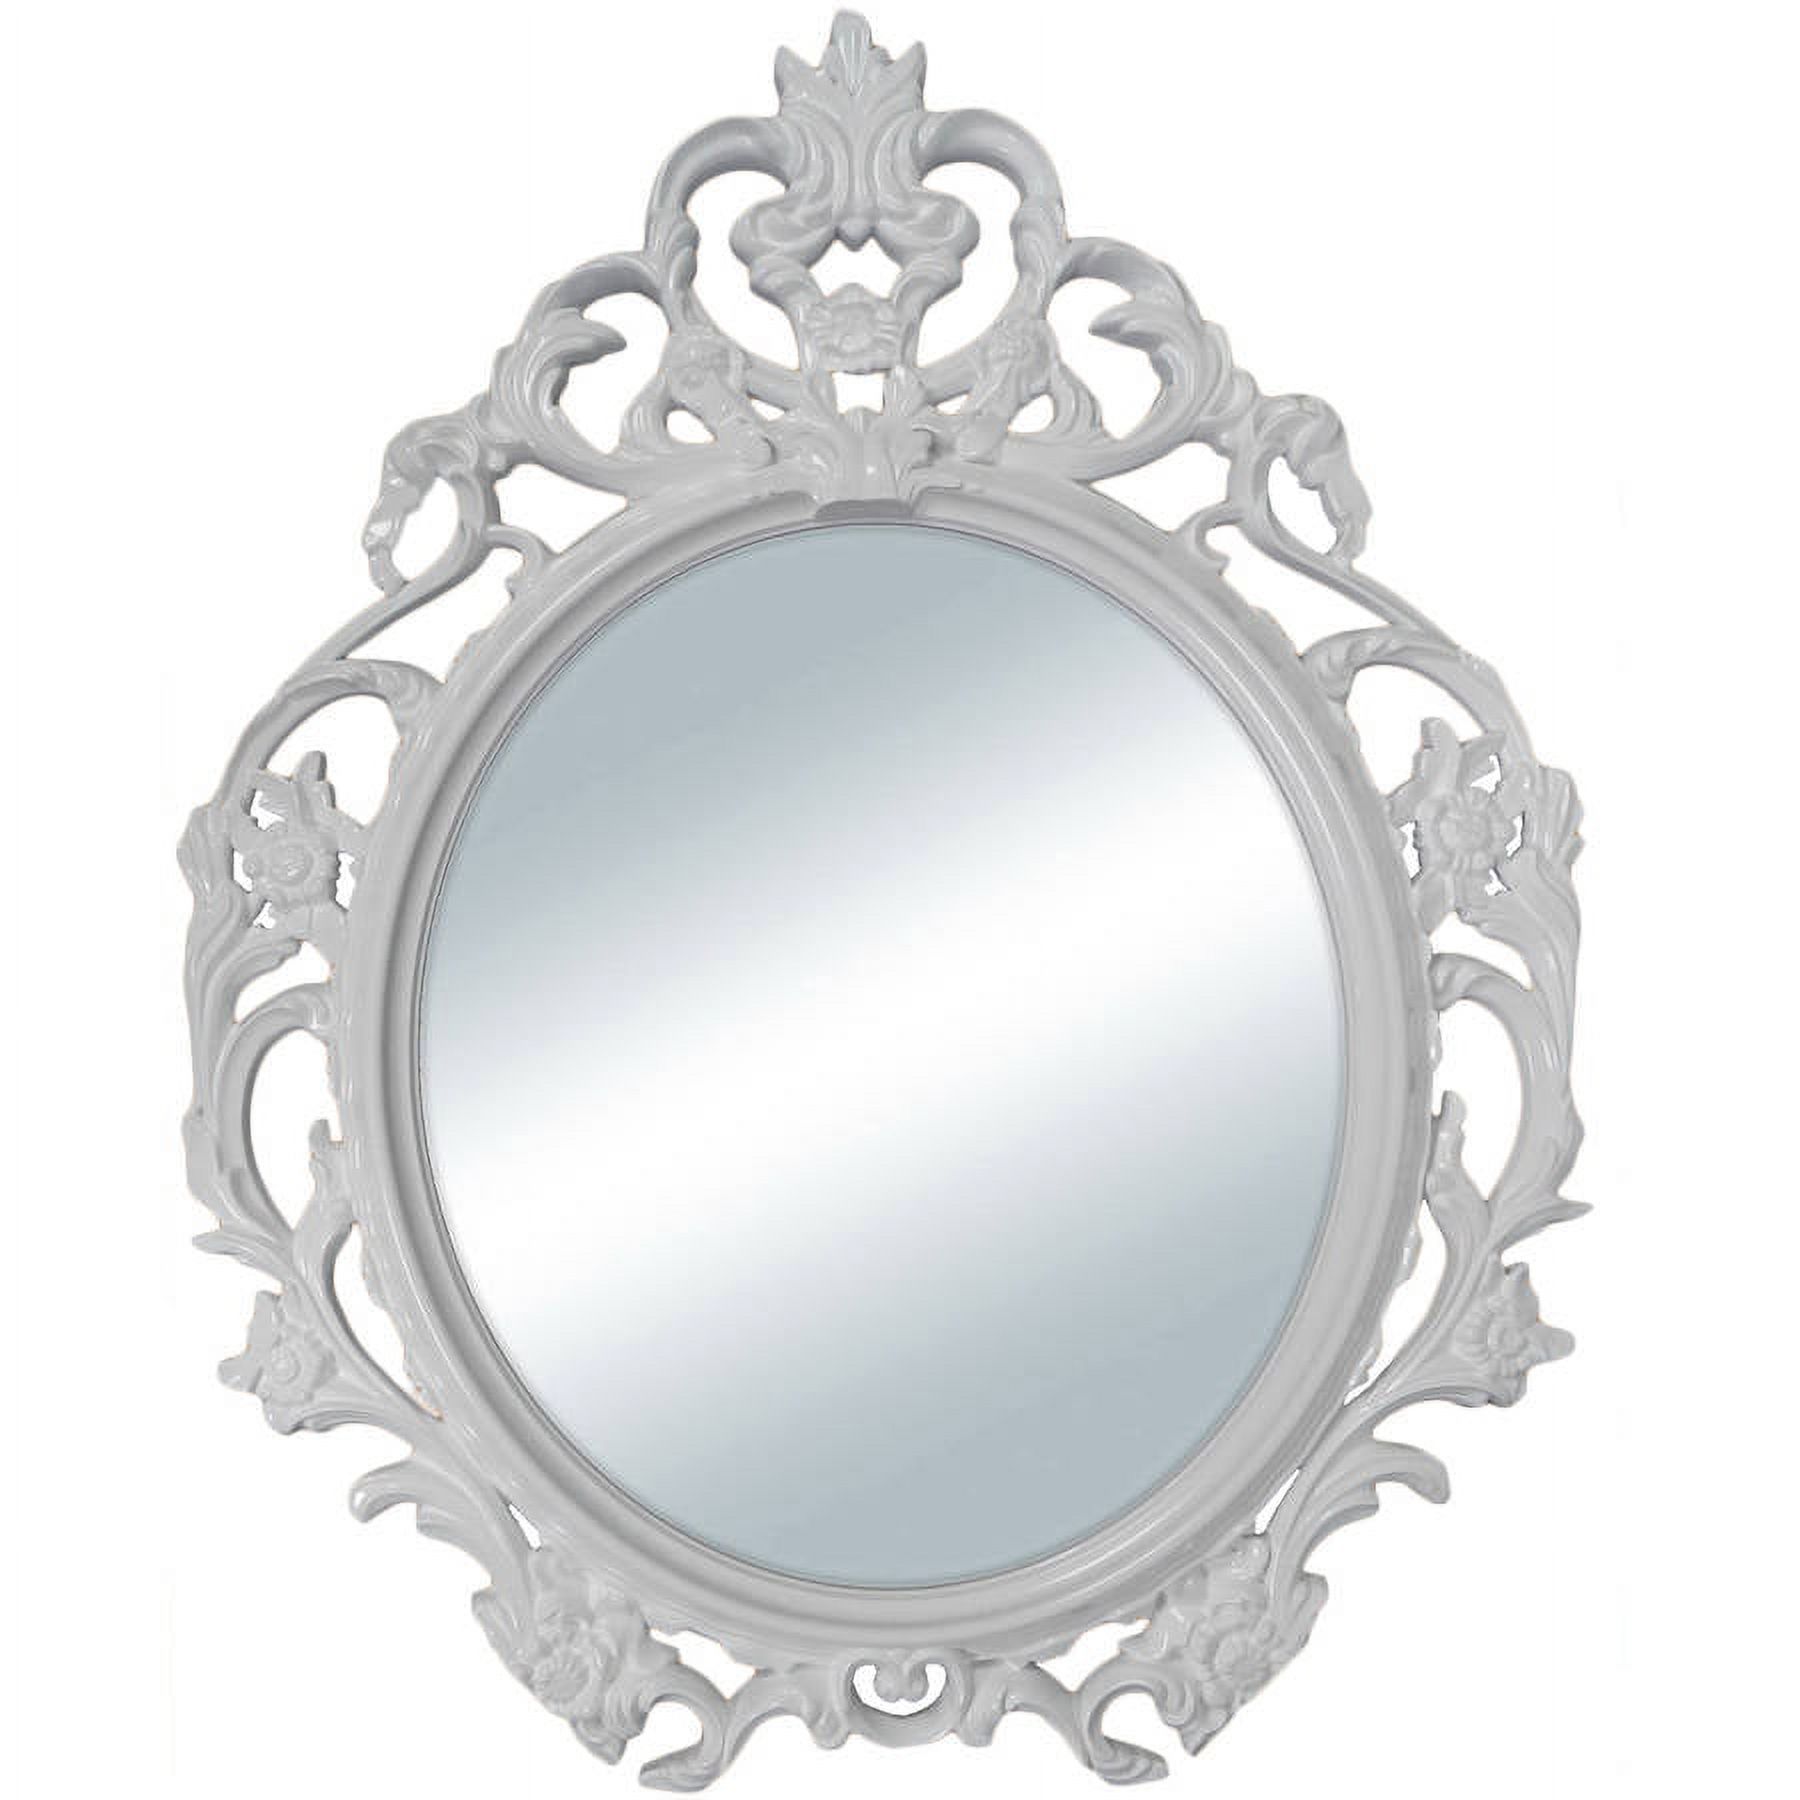 Mainstays White Baroque Oval Wall Mirror 24"x19" - image 1 of 2